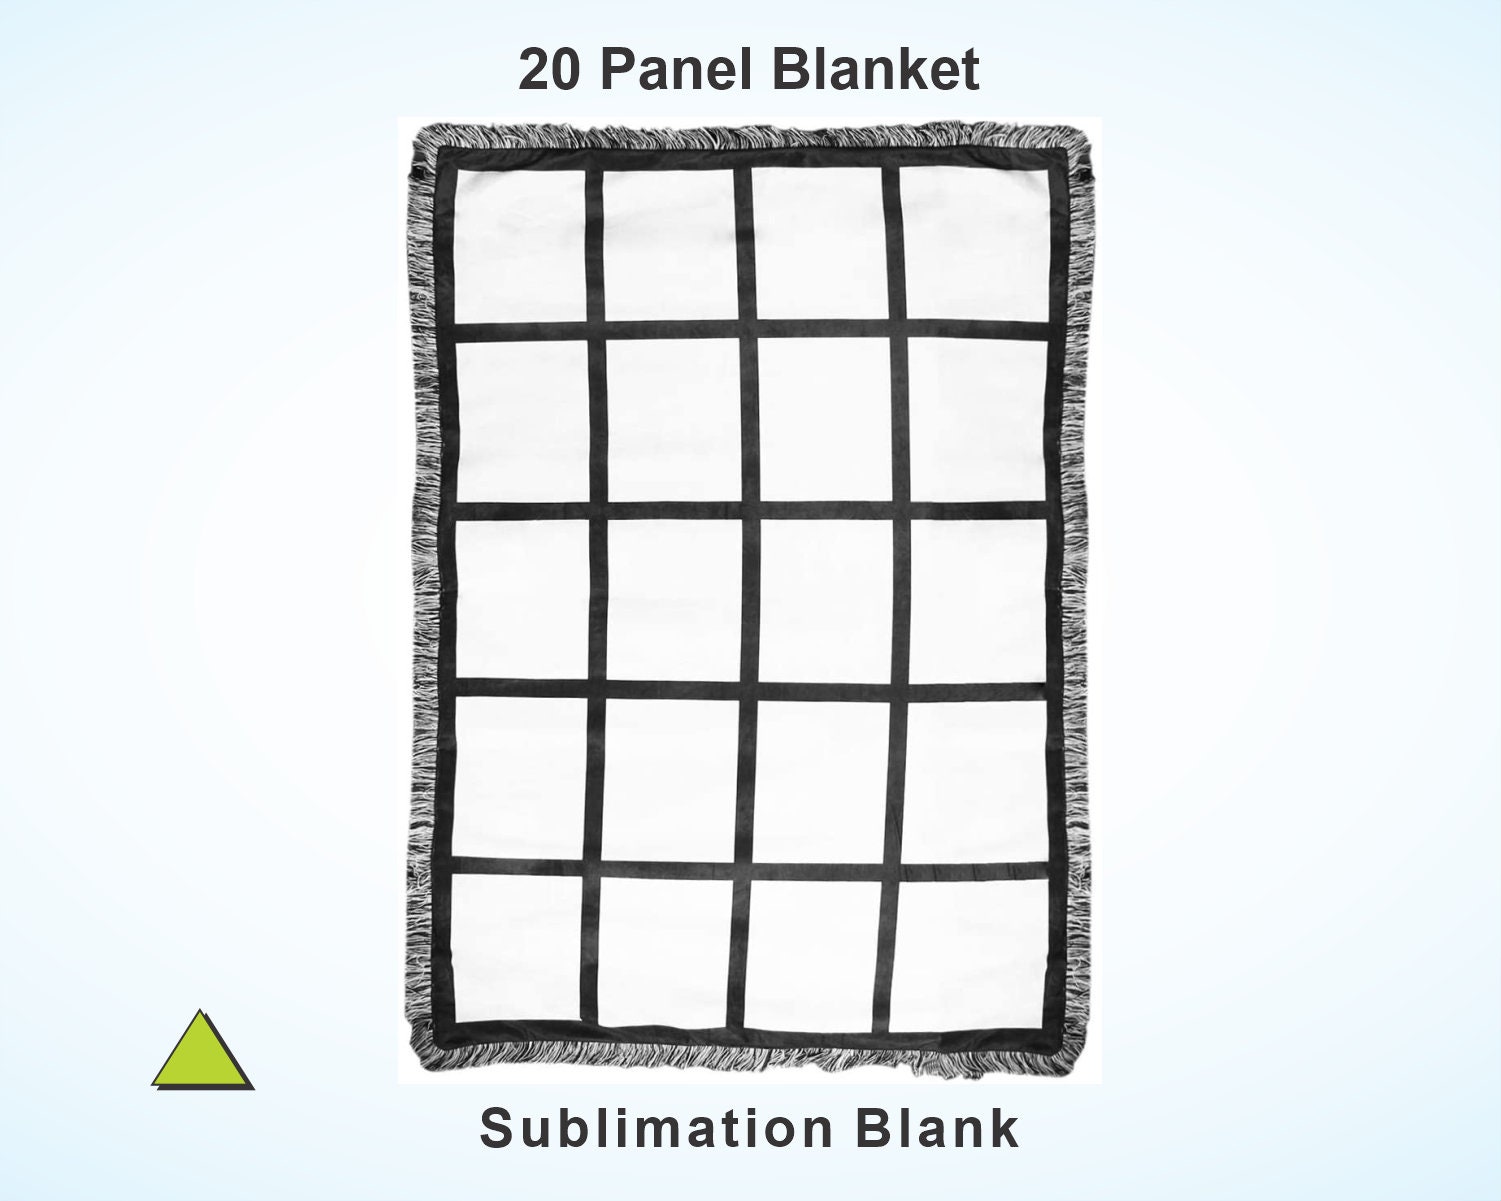 LYFLES Sublimation Blanks Blanket 40 x 60 with 20 Panel and 2PCS Blank  Pillow Cases 16 x 16 with 9 Printable Panels